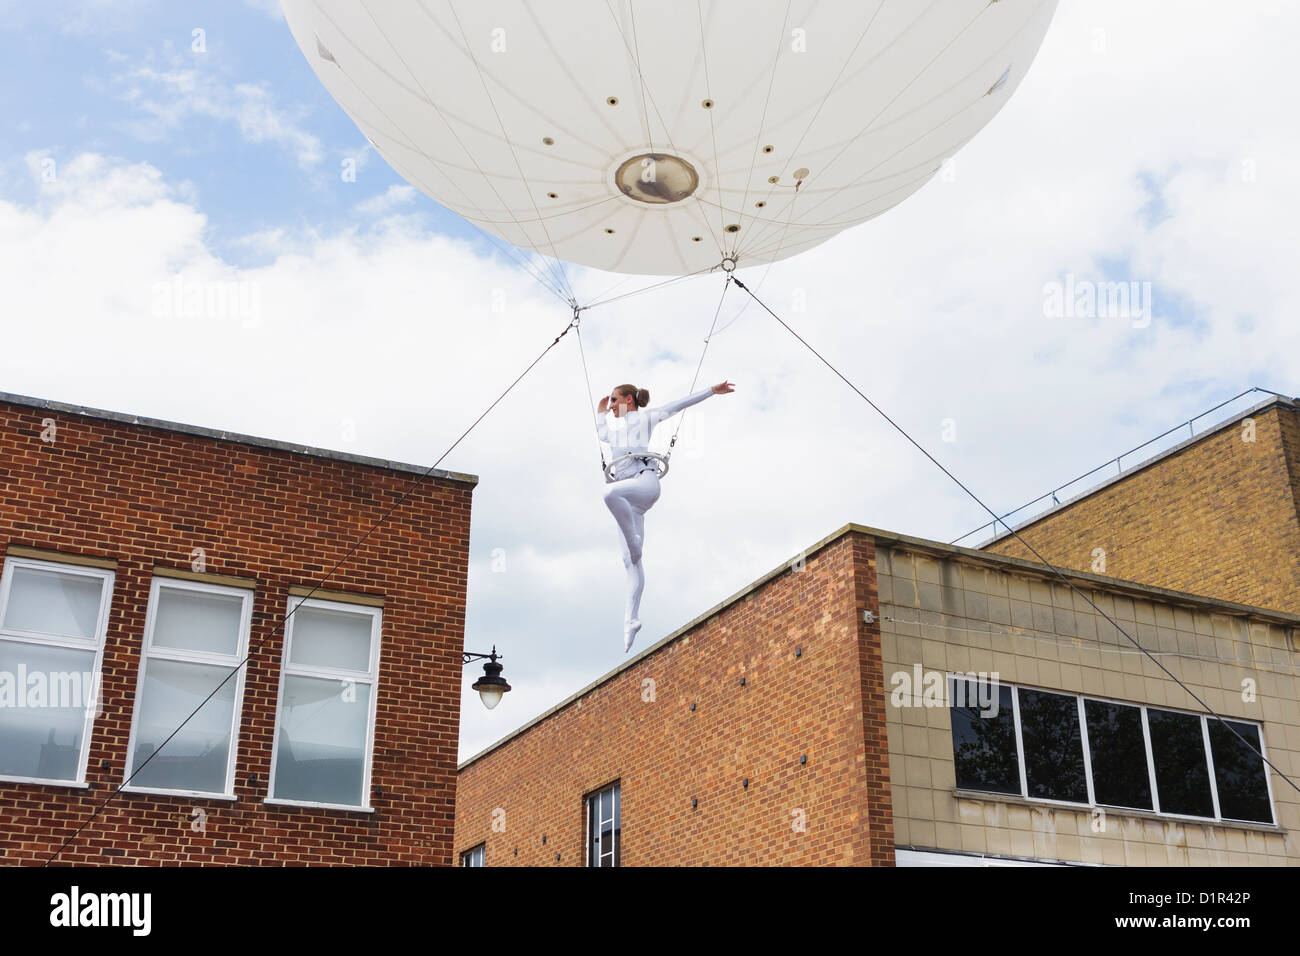 A trapeze artist is suspended from a large helium balloon during a Heliosphere performance. St Albans, UK 2012 Stock Photo